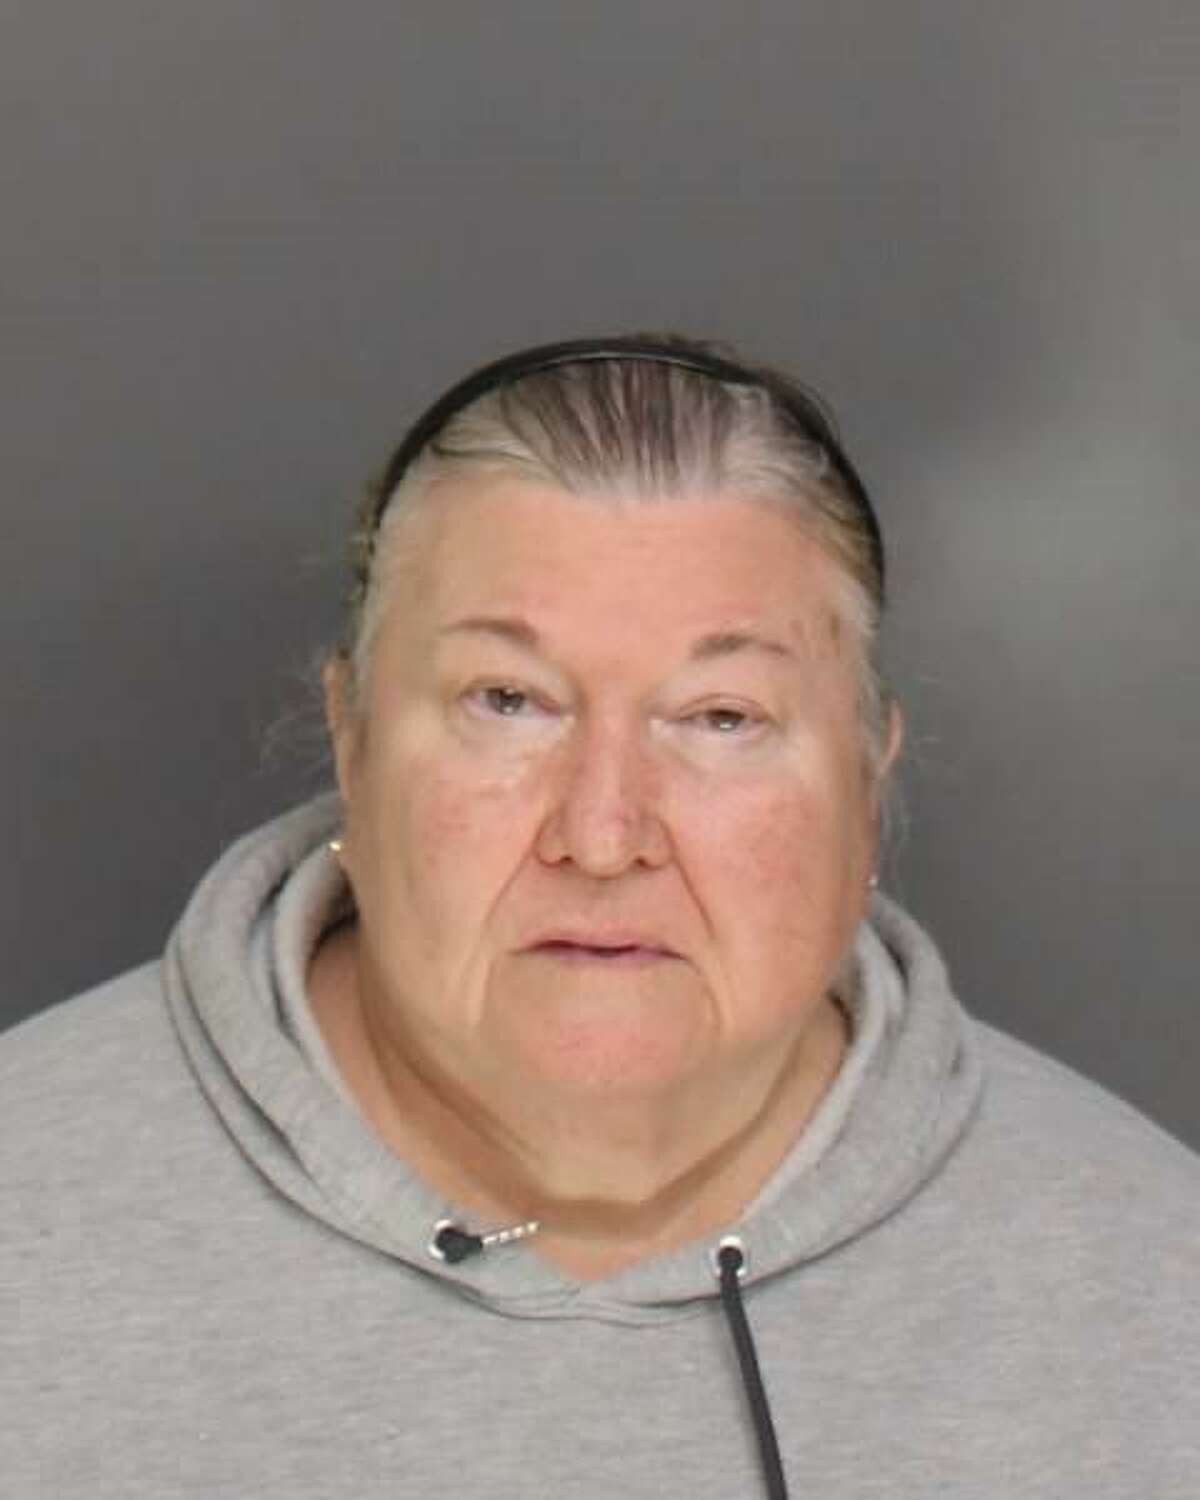 Dale LaPrade, 66, has been charged with embezzling more than $60,000 of the historic Park Cemetery’s money.